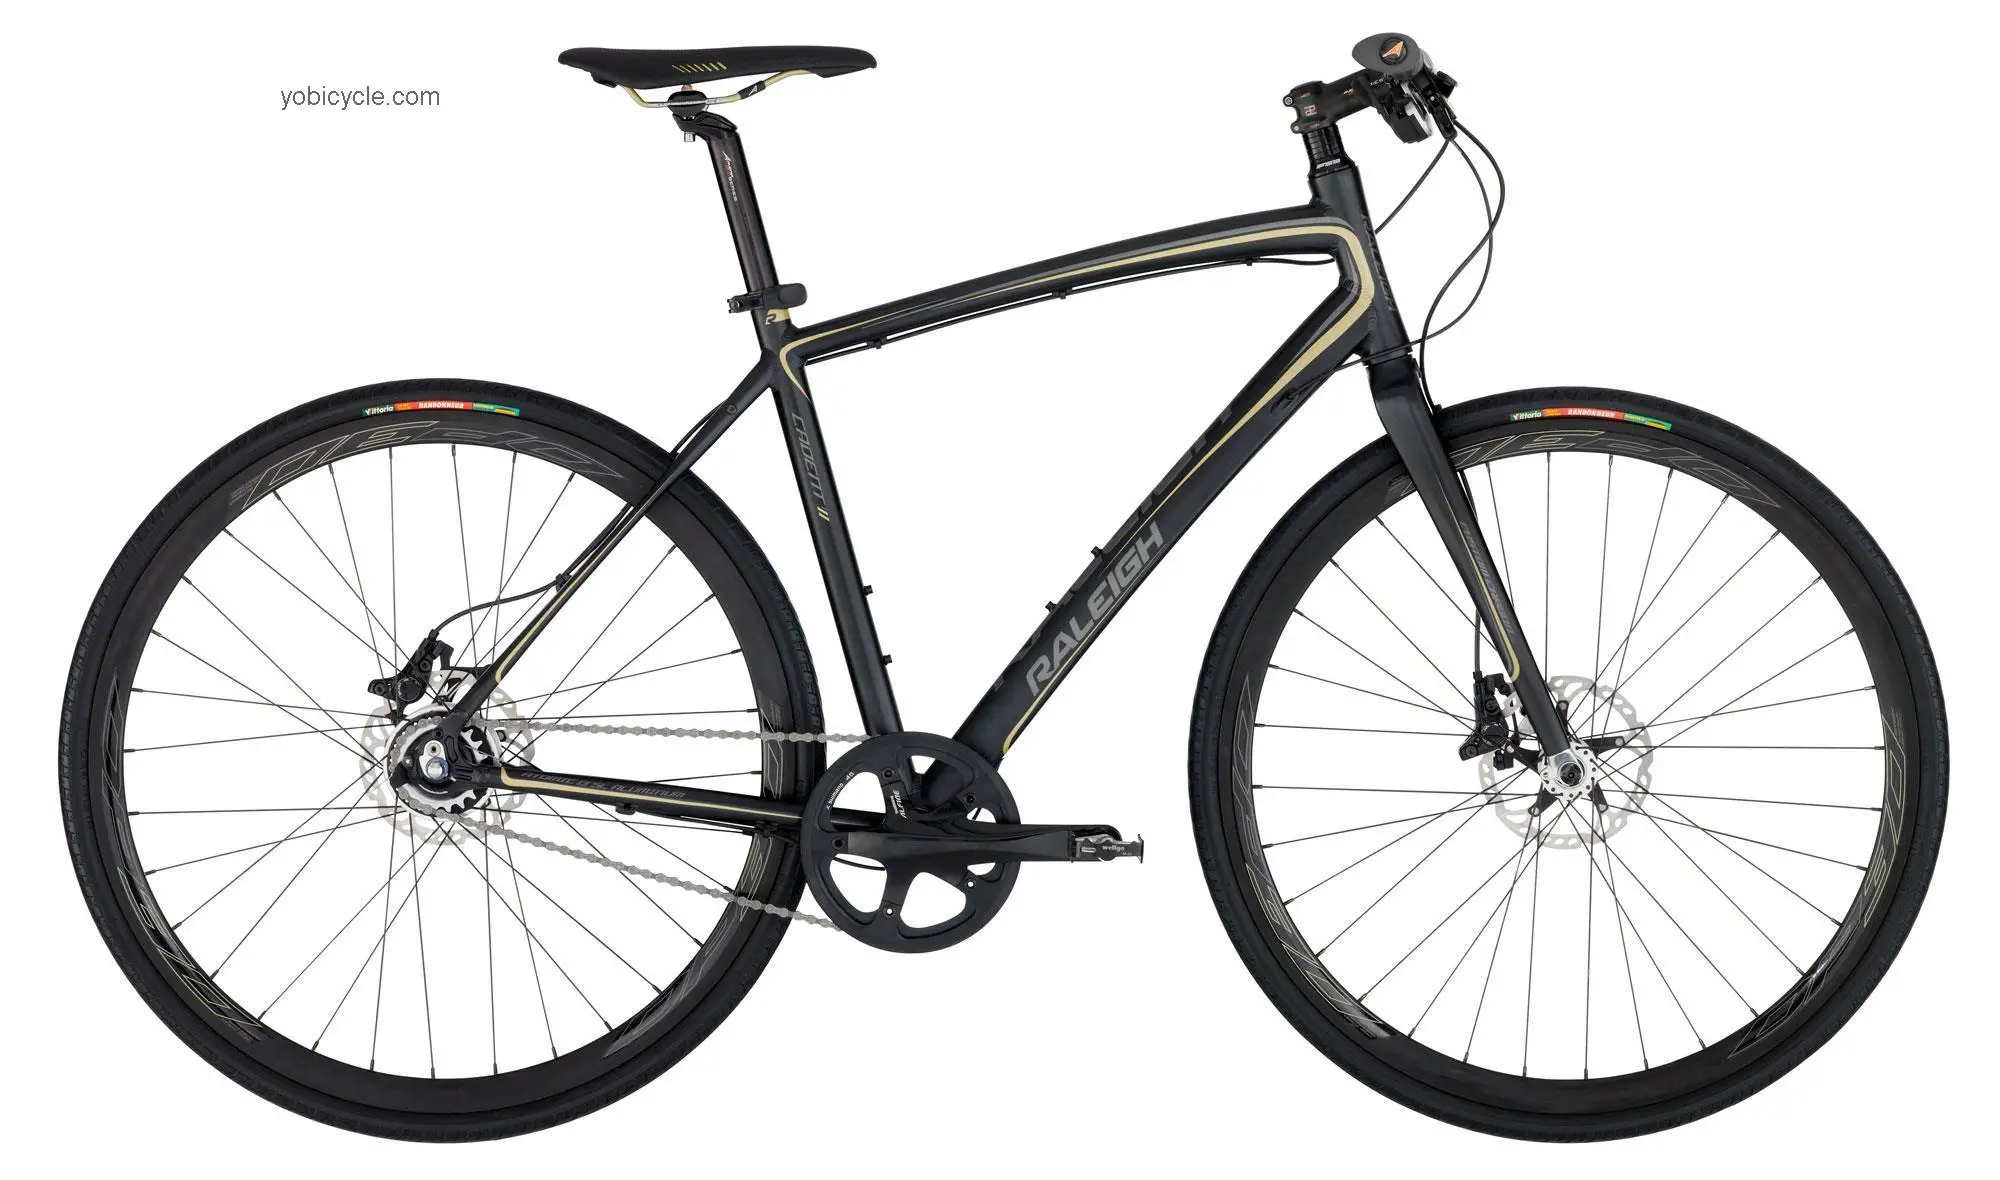 Raleigh Cadent i11 2012 comparison online with competitors